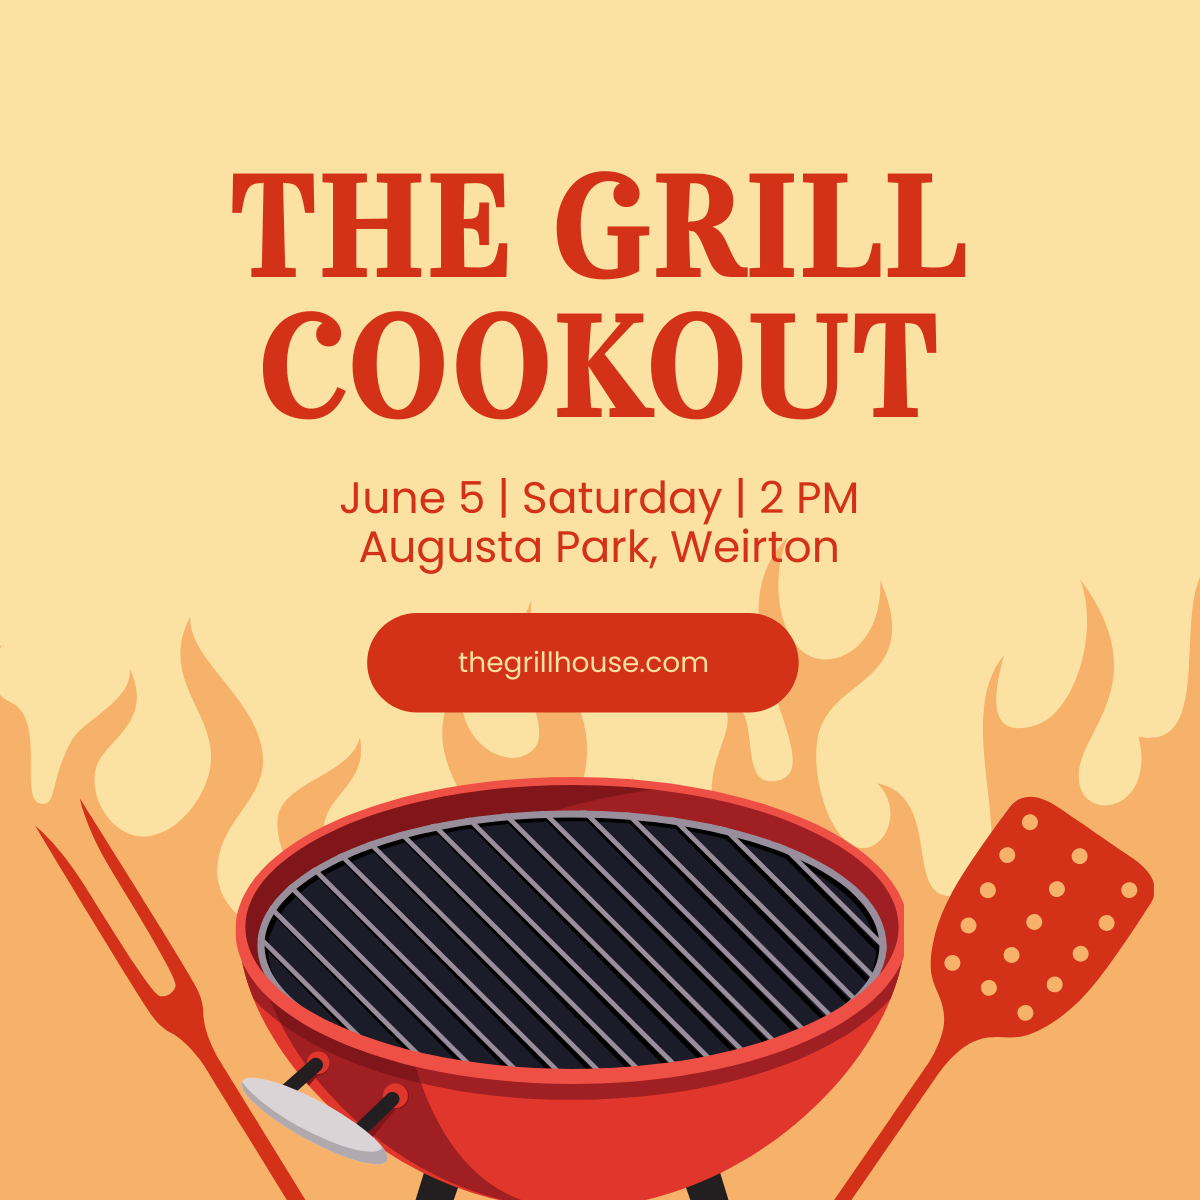 Free Grill Cookout Linkedin Post Template